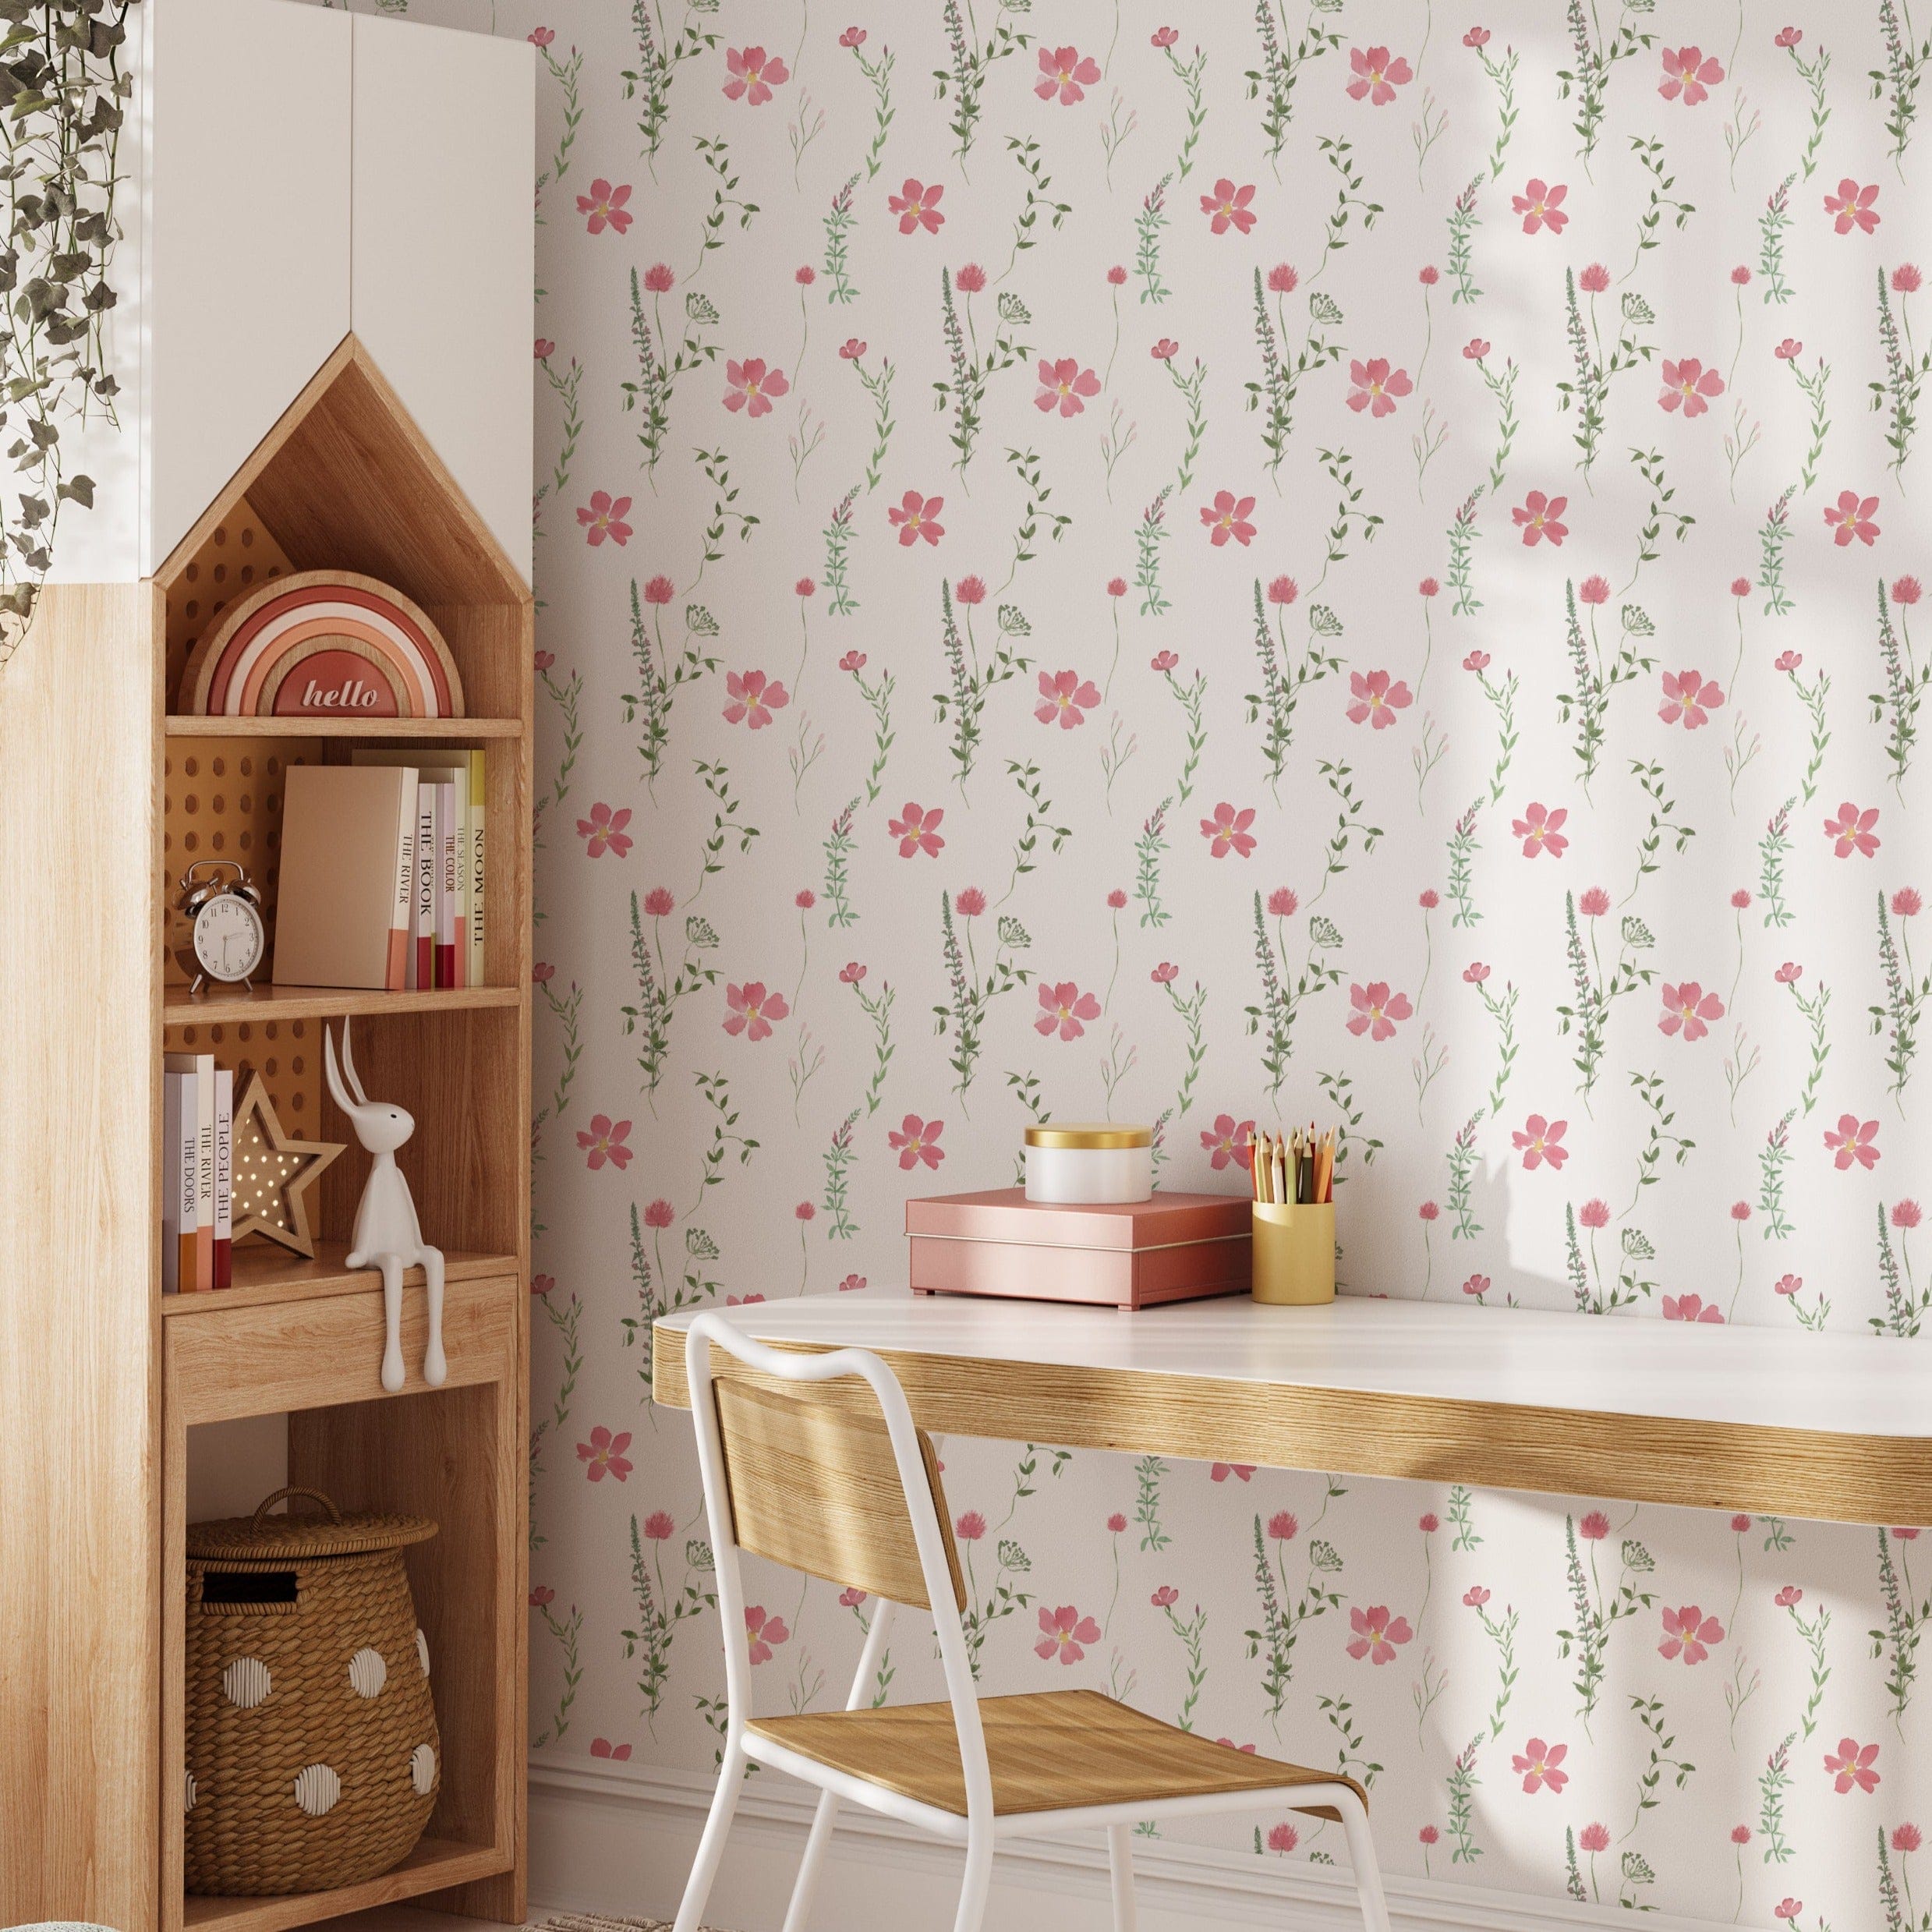 A cozy study area featuring the Spring Serenity Wallpaper, highlighting its pink flower and green leaf pattern, with a white desk and wooden bookshelf filled with books and decor items